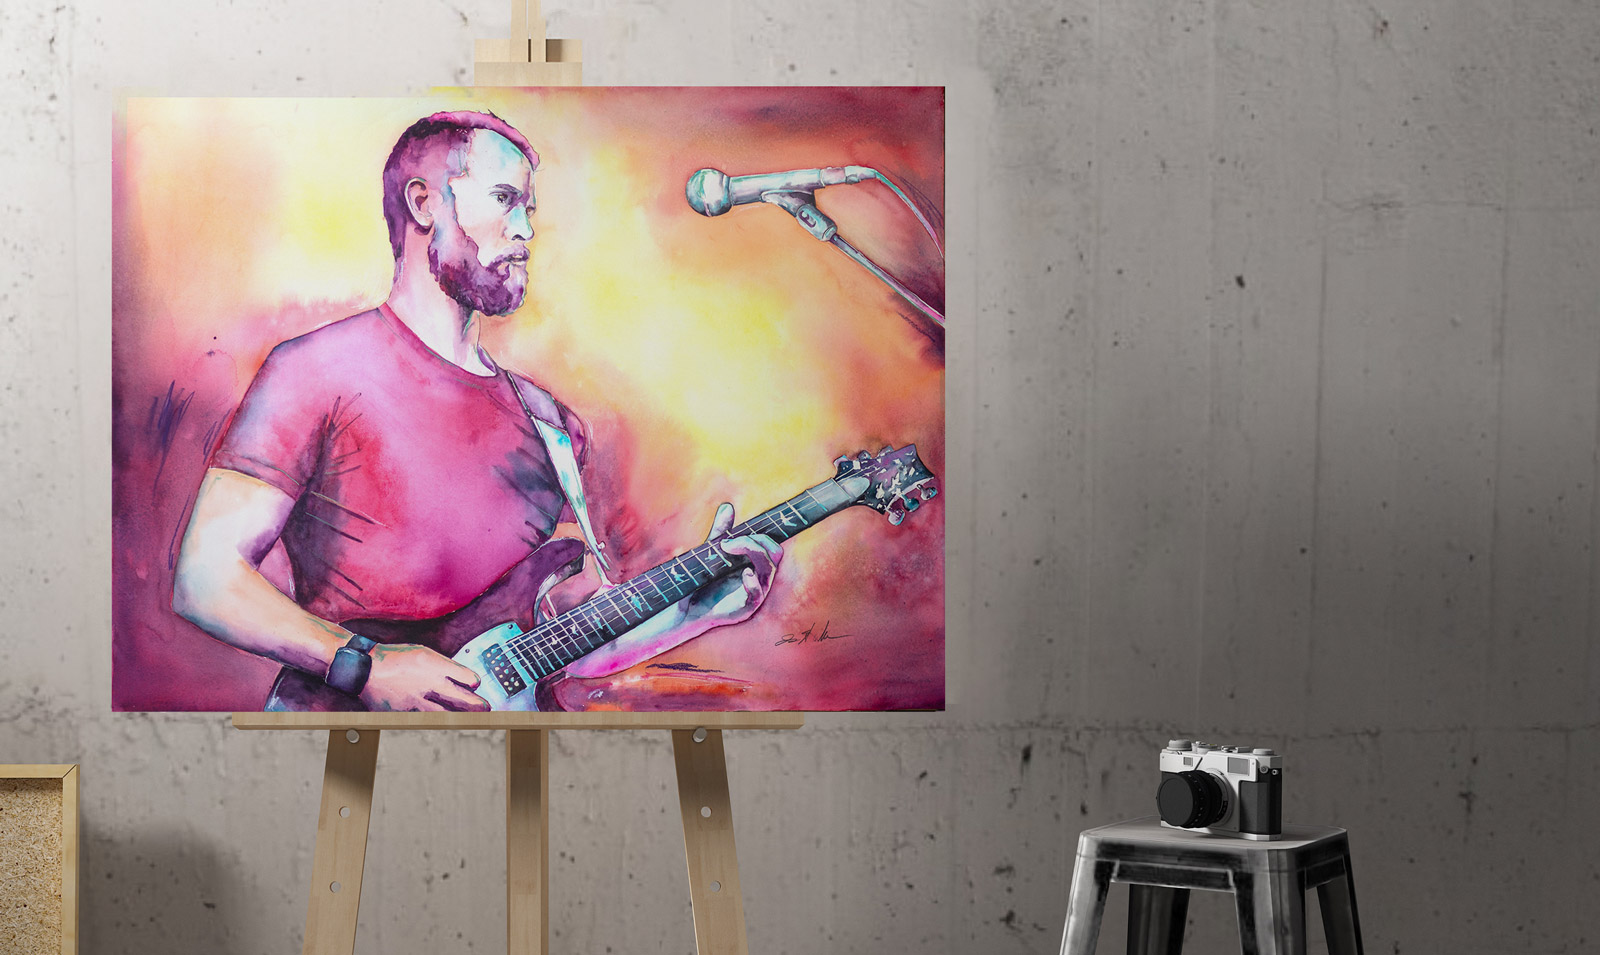 This is Taylor painting by Jamie Hansen, painting of a man and guitar